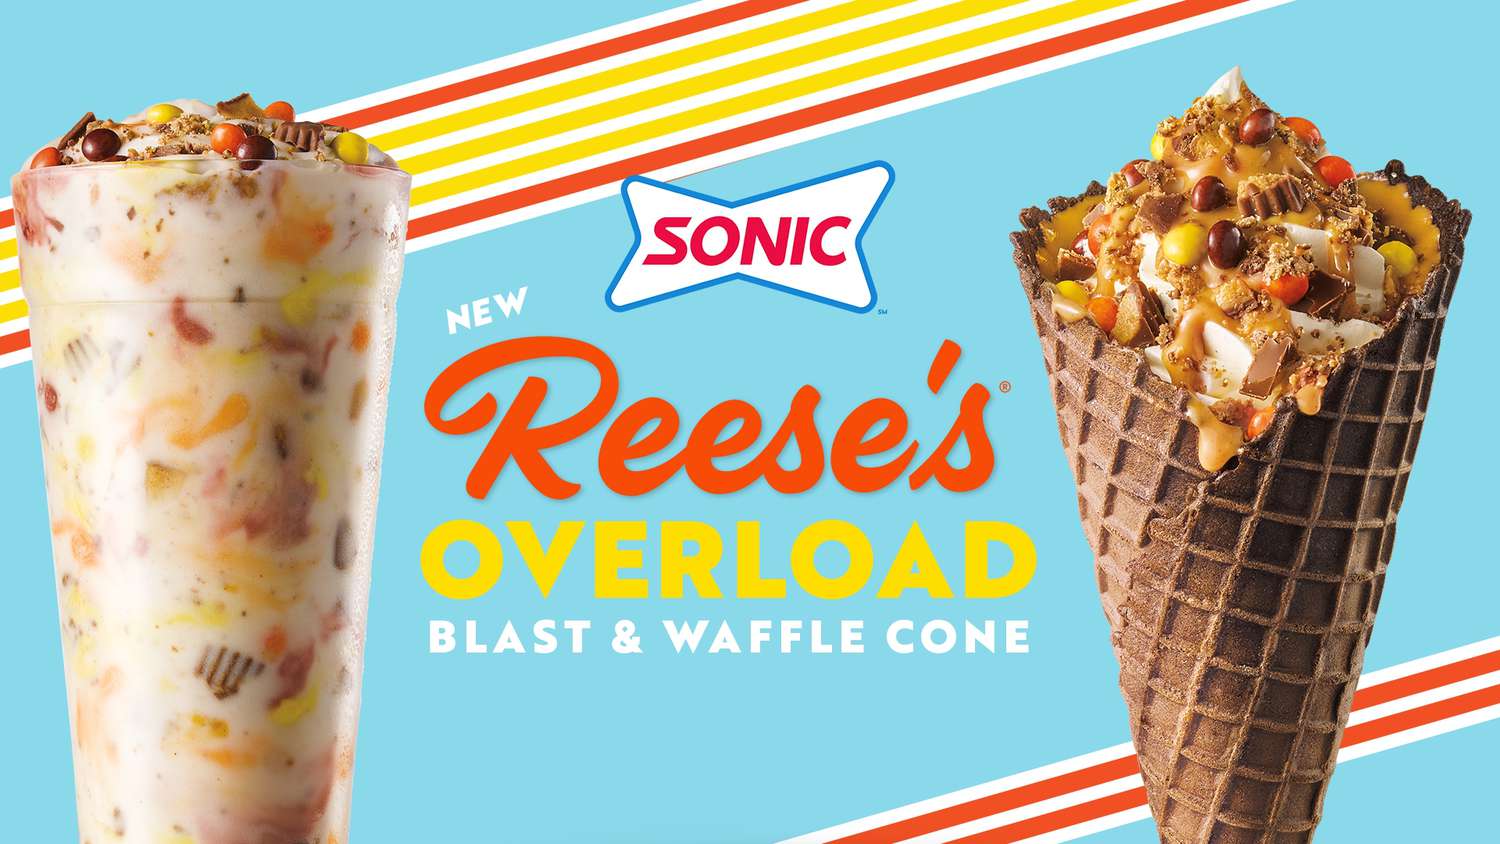 Sonic Reese's Overload Blast Waffle Cone